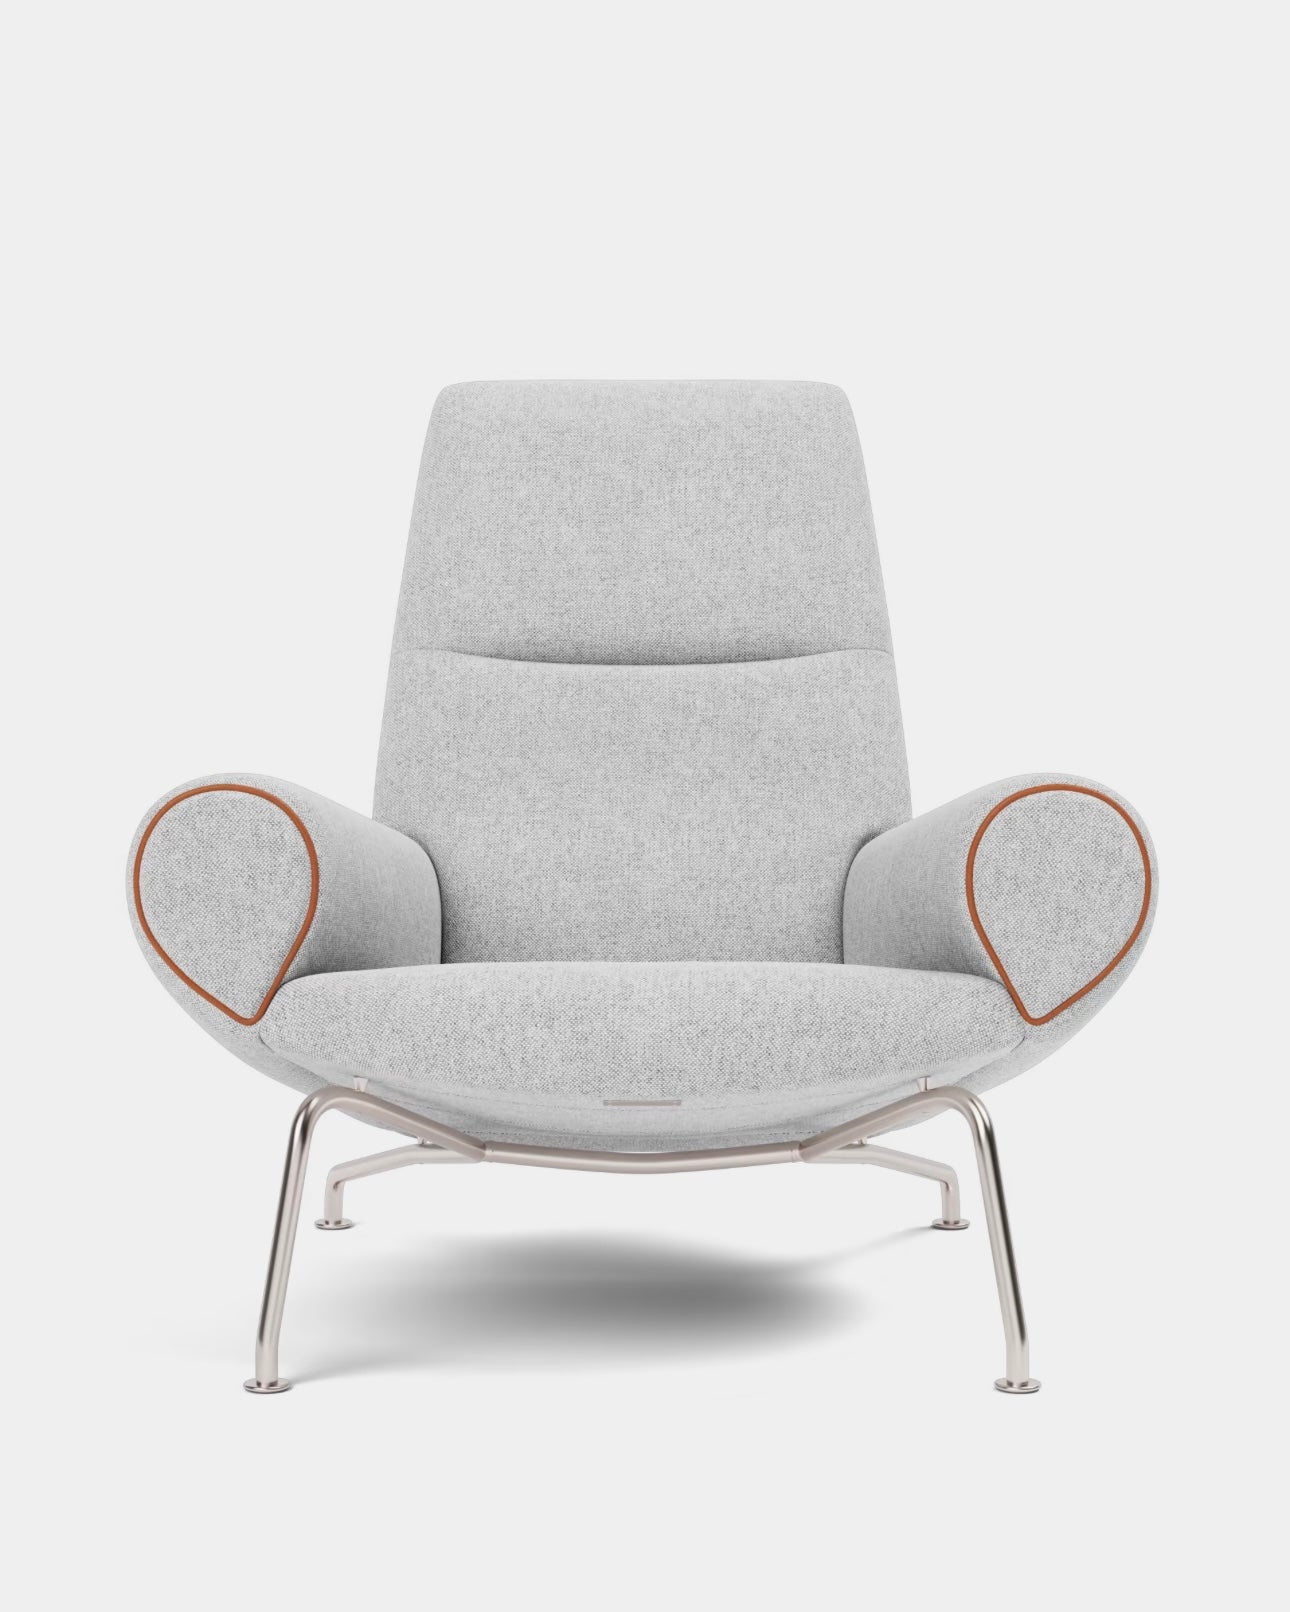 Queen Chair | Wool Blend and Stainless Steel